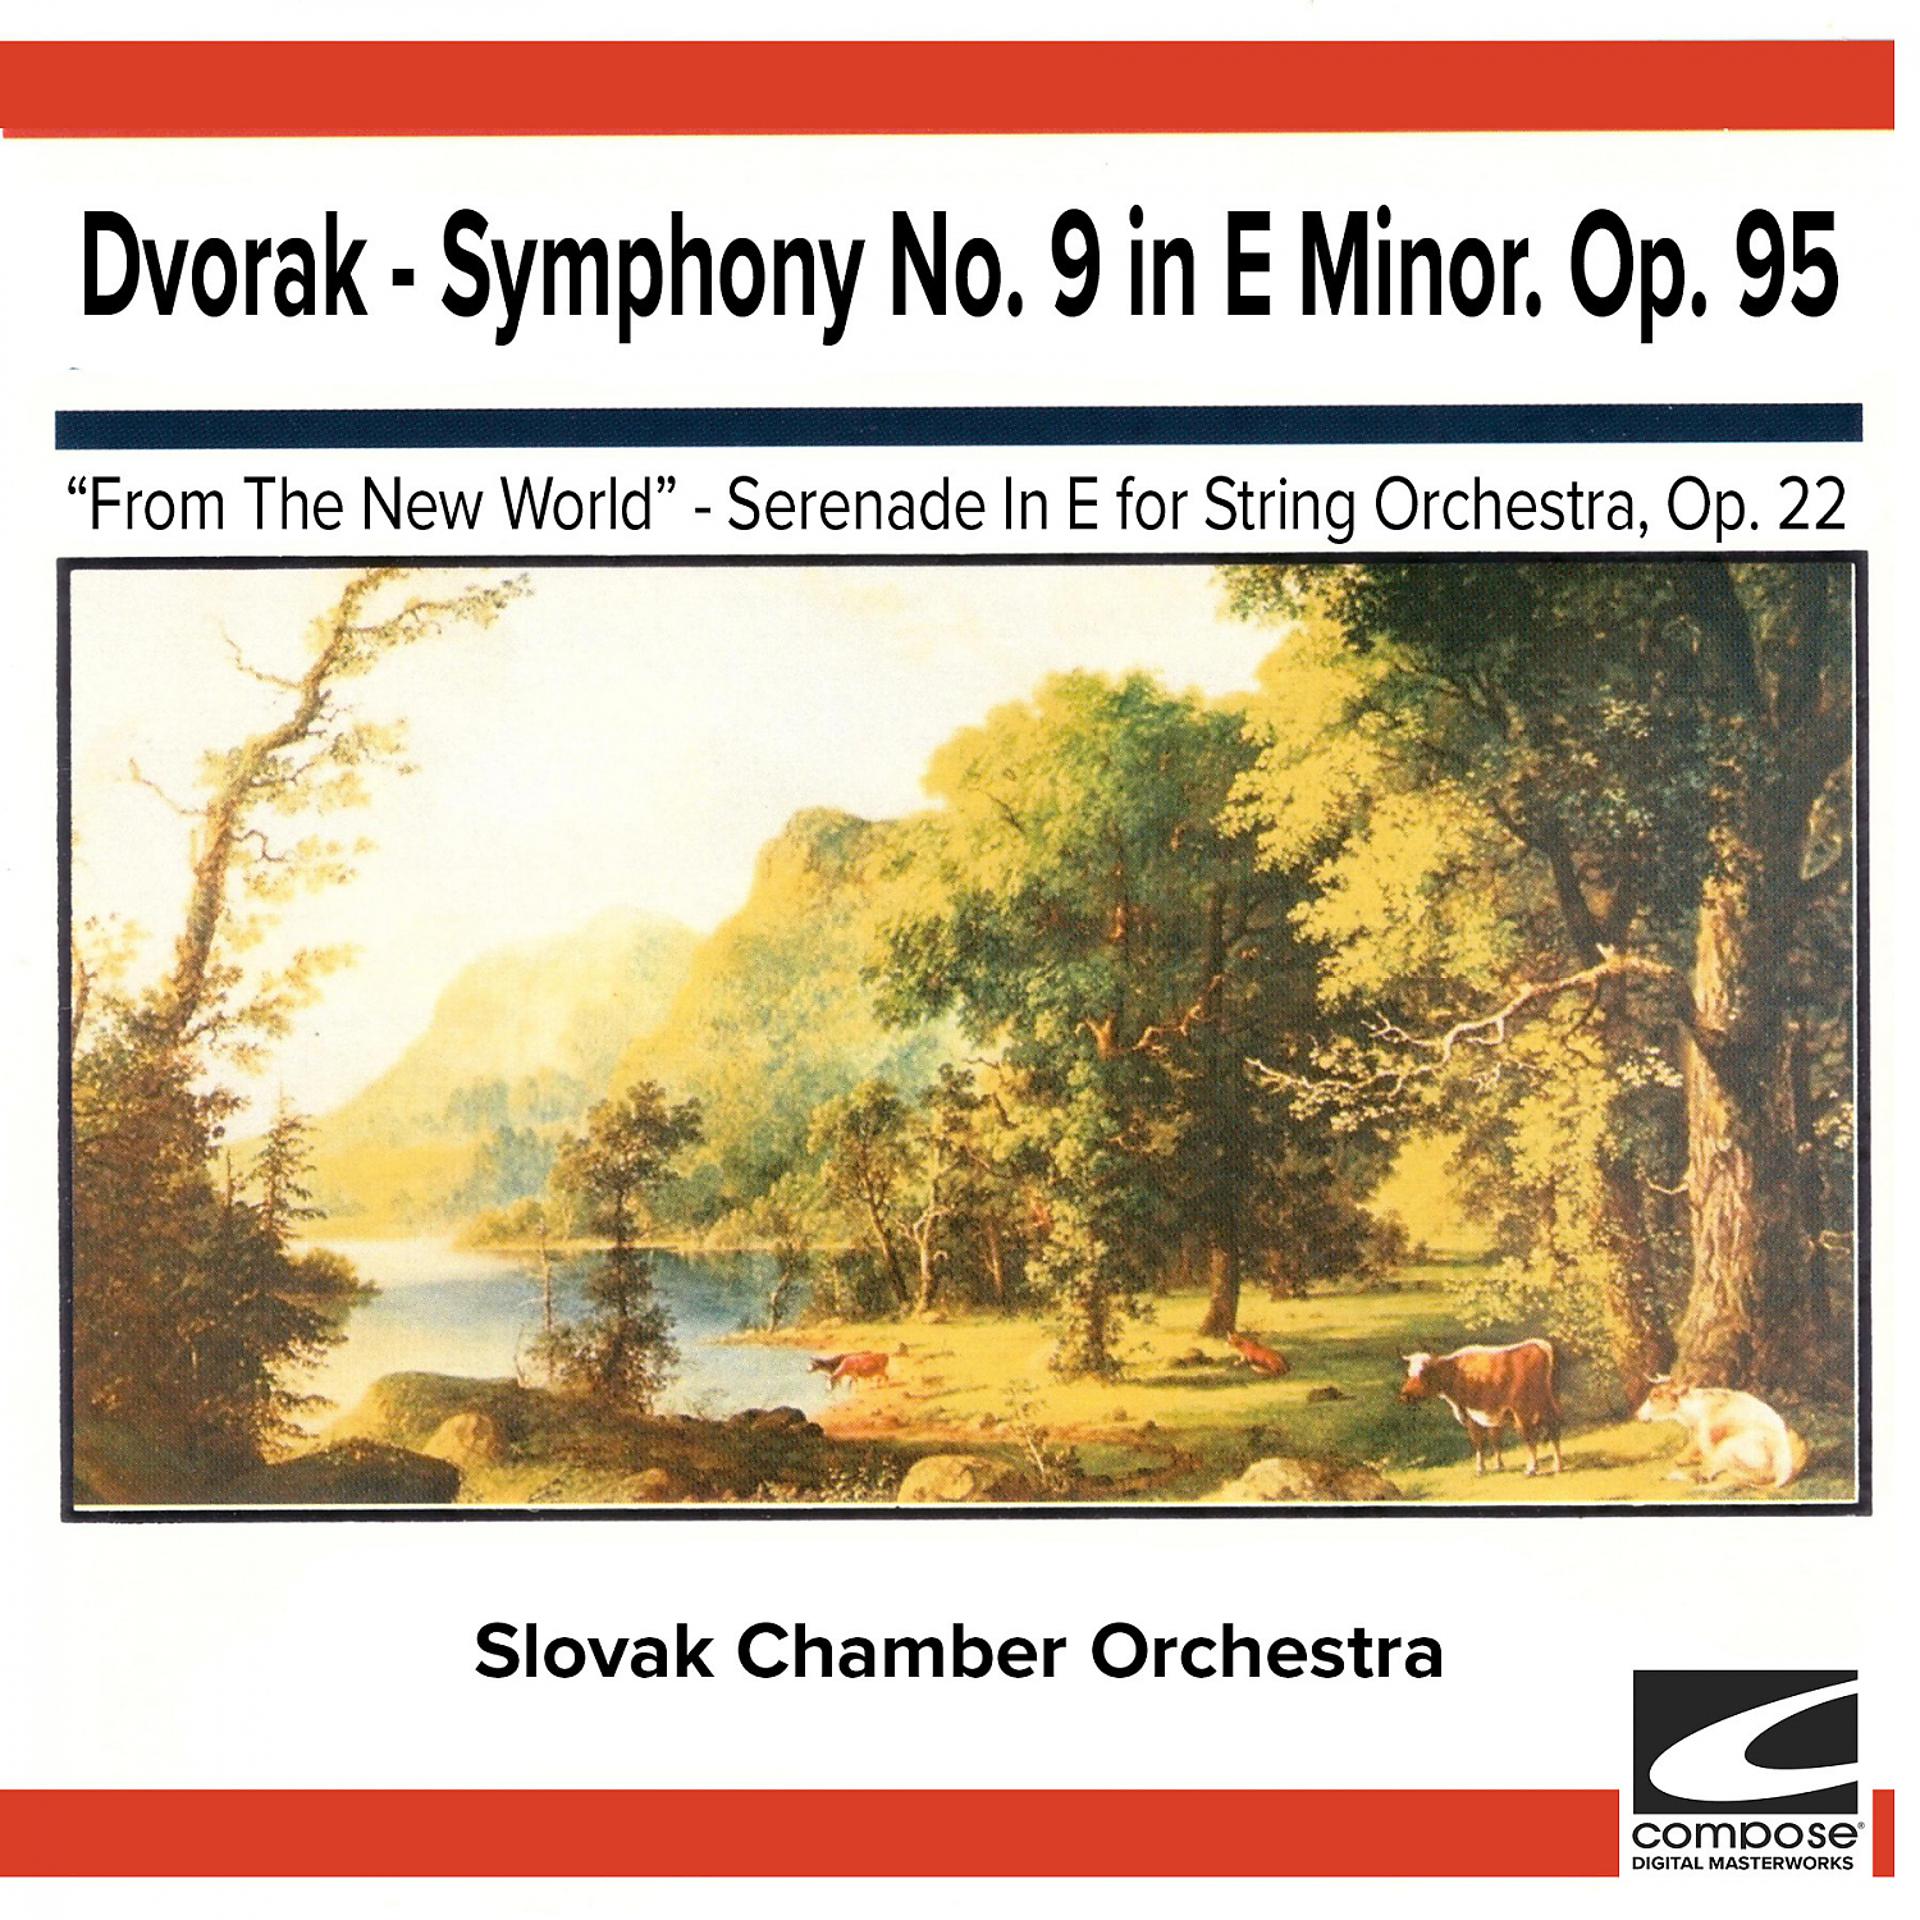 Постер альбома Dvorak - Symphony No. 9 in E Minor. Op. 95, "From The New World" - Serenade In E for String Orchestra, Op. 22